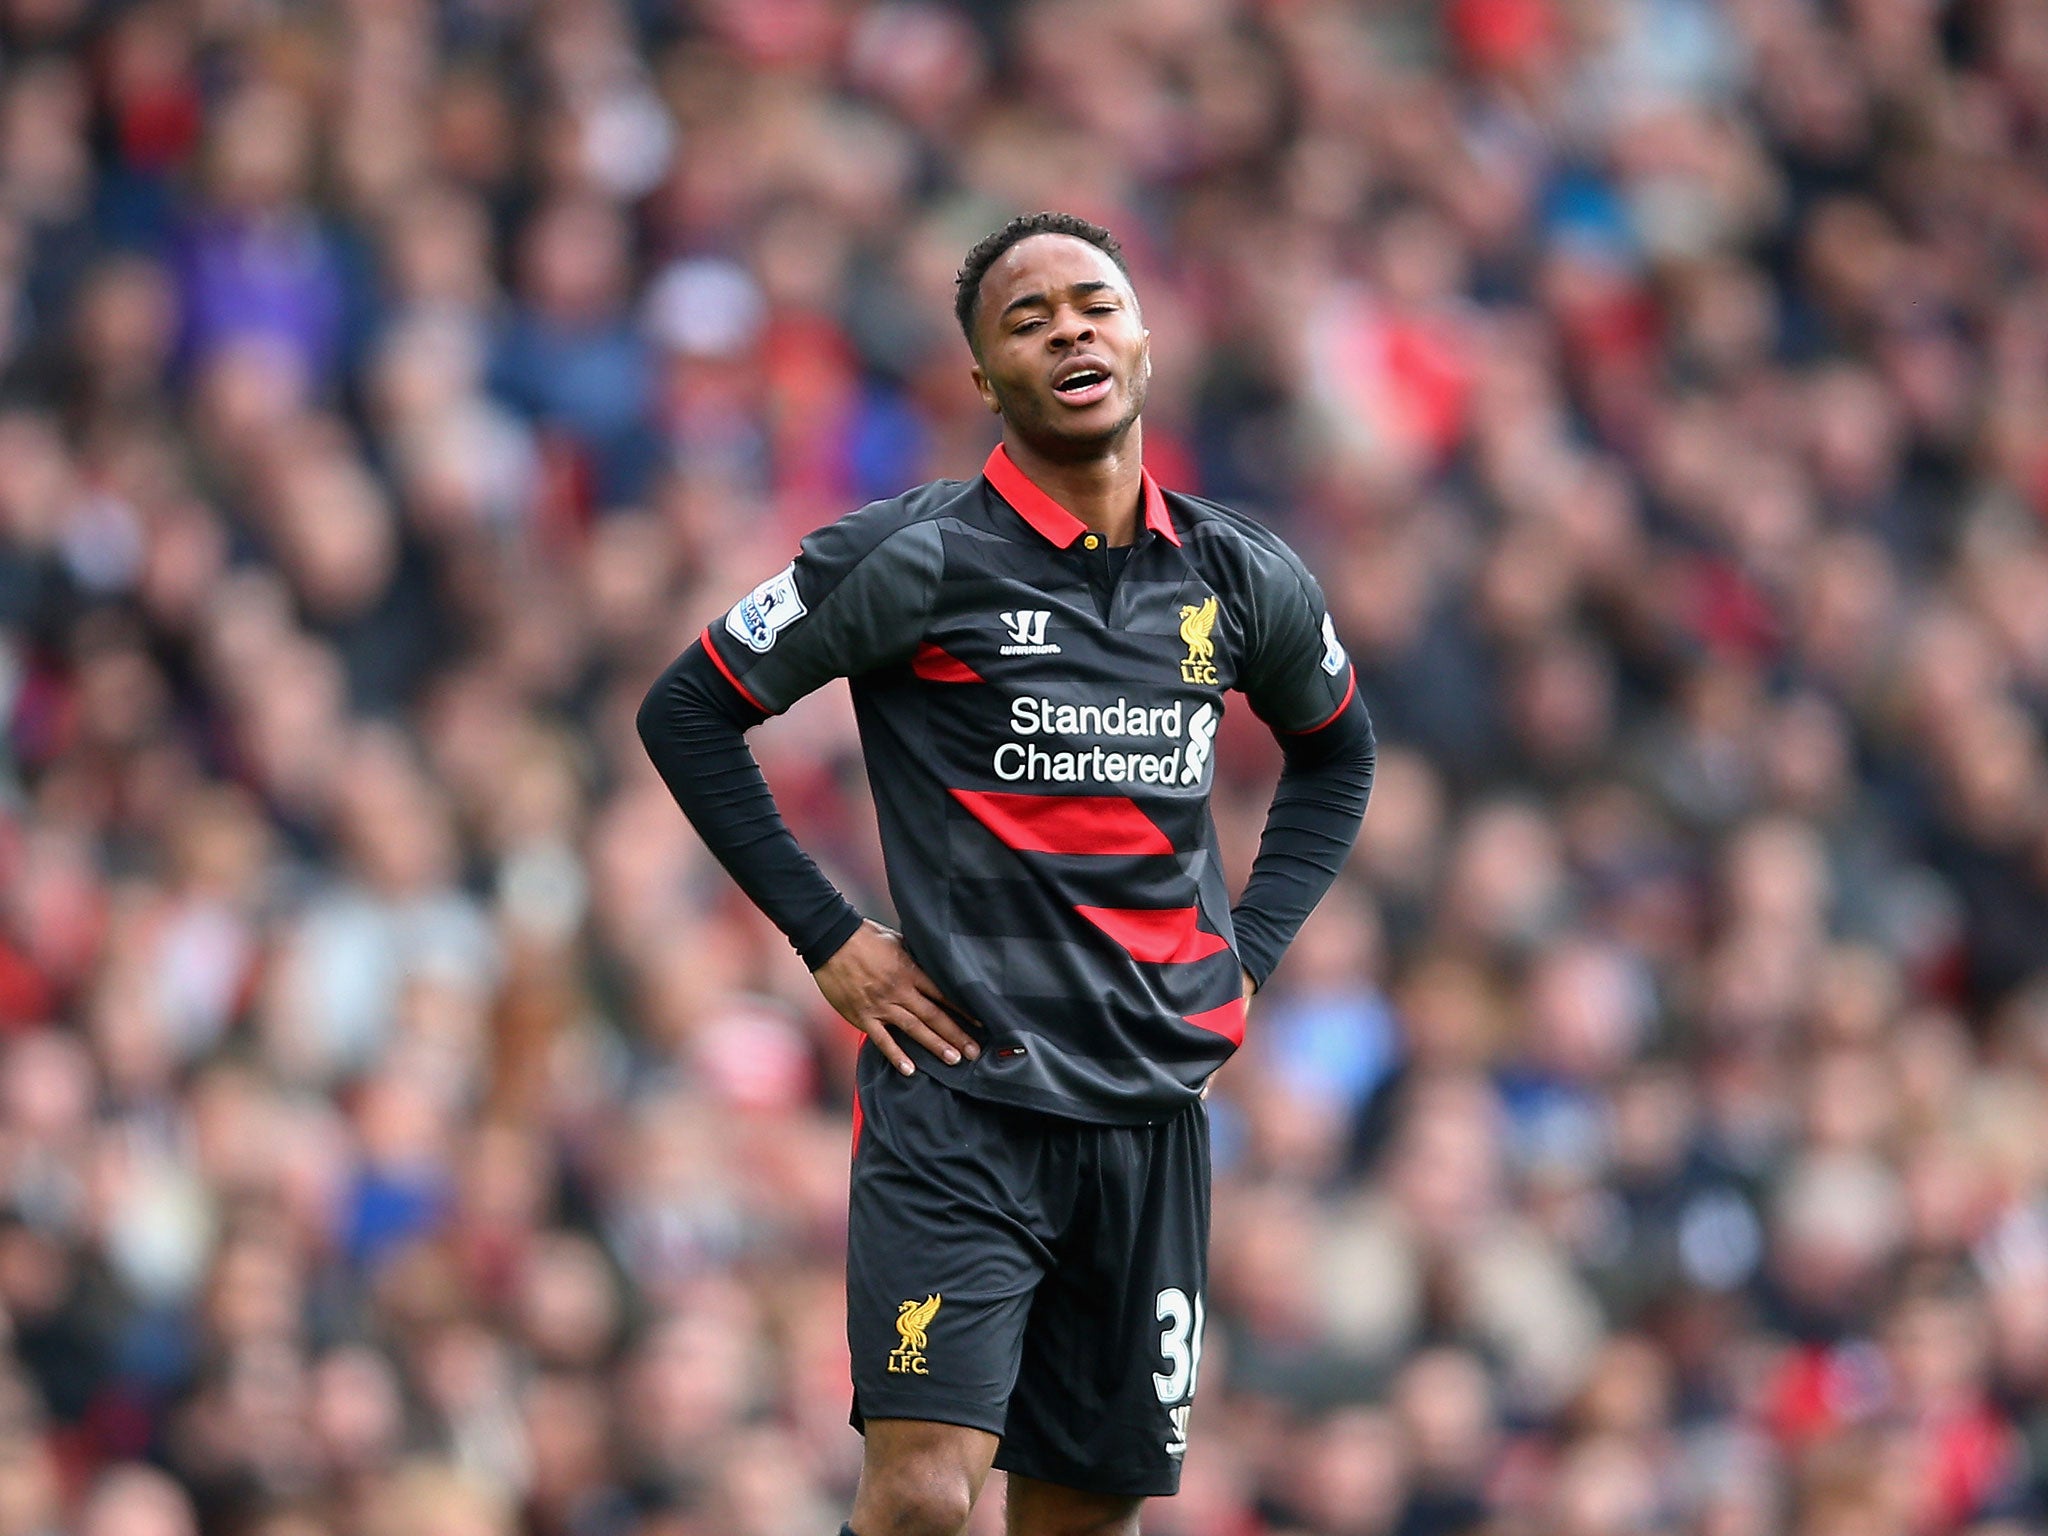 Raheem Sterling reacts in frustration after missing a chance